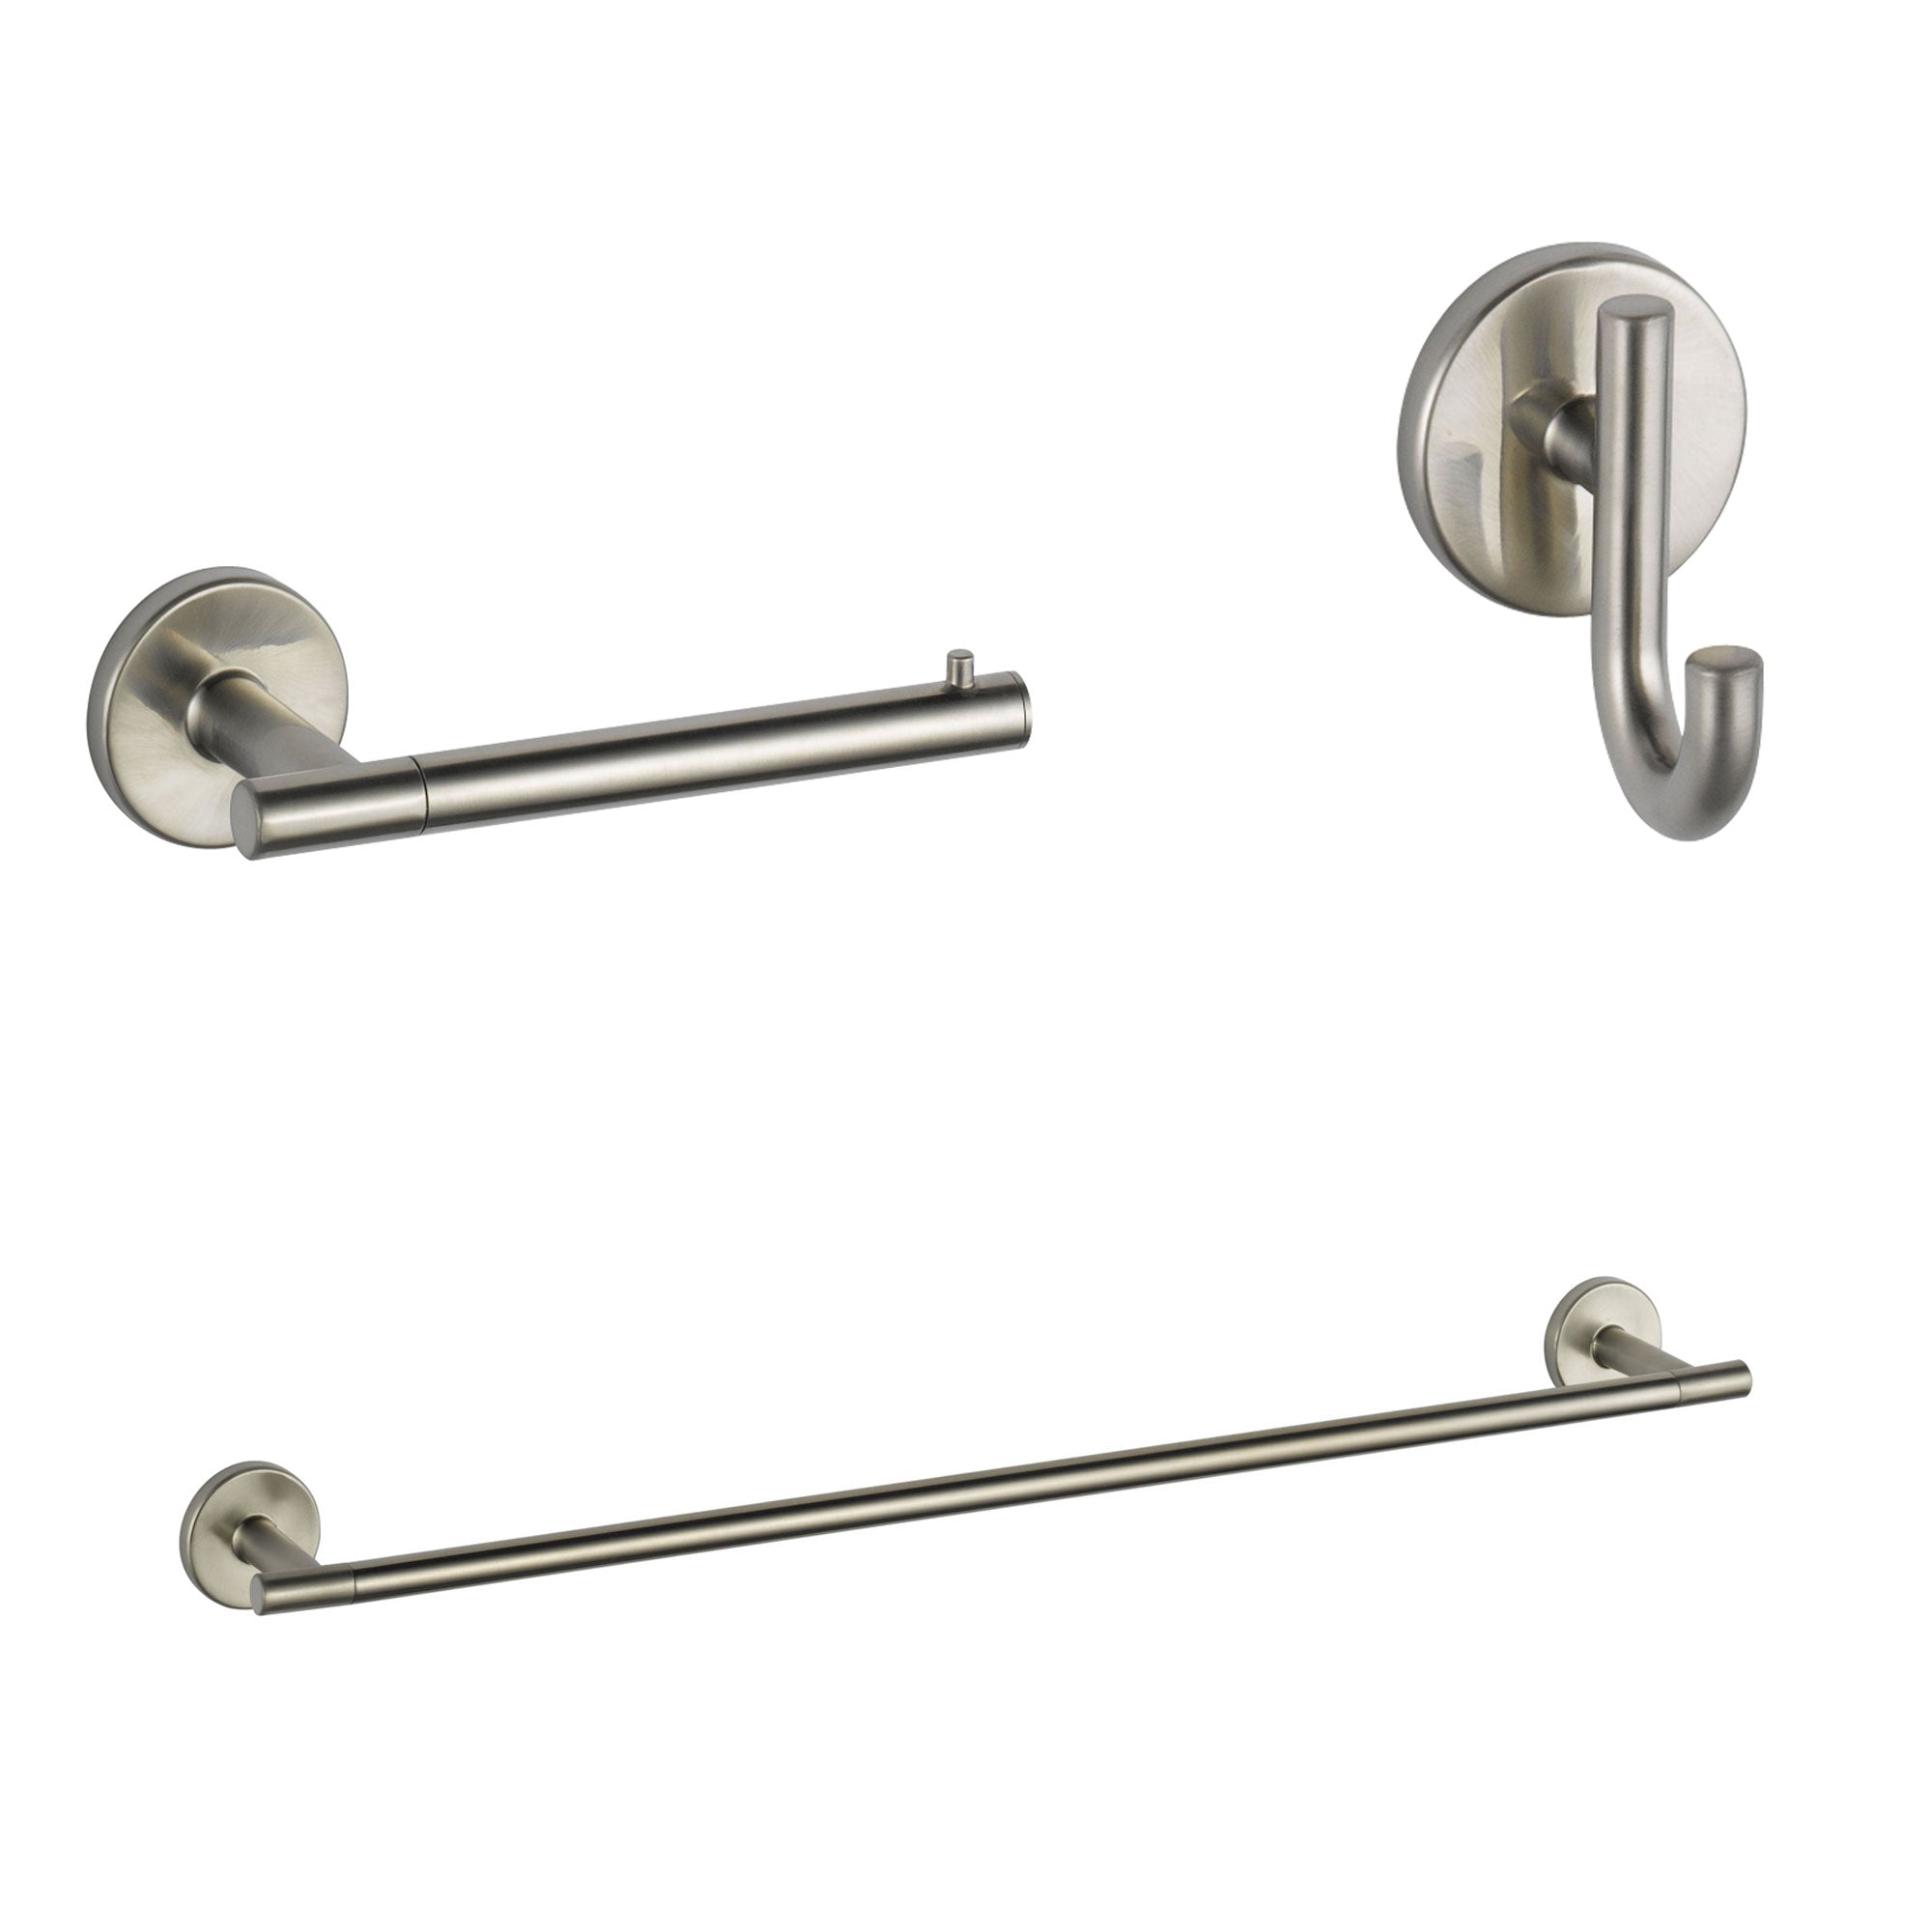 Delta Trinsic Stainless Steel Finish BASICS Bathroom Accessory Set Includes: 24" Towel Bar, Toilet Paper Holder, and Robe Hook D10004AP